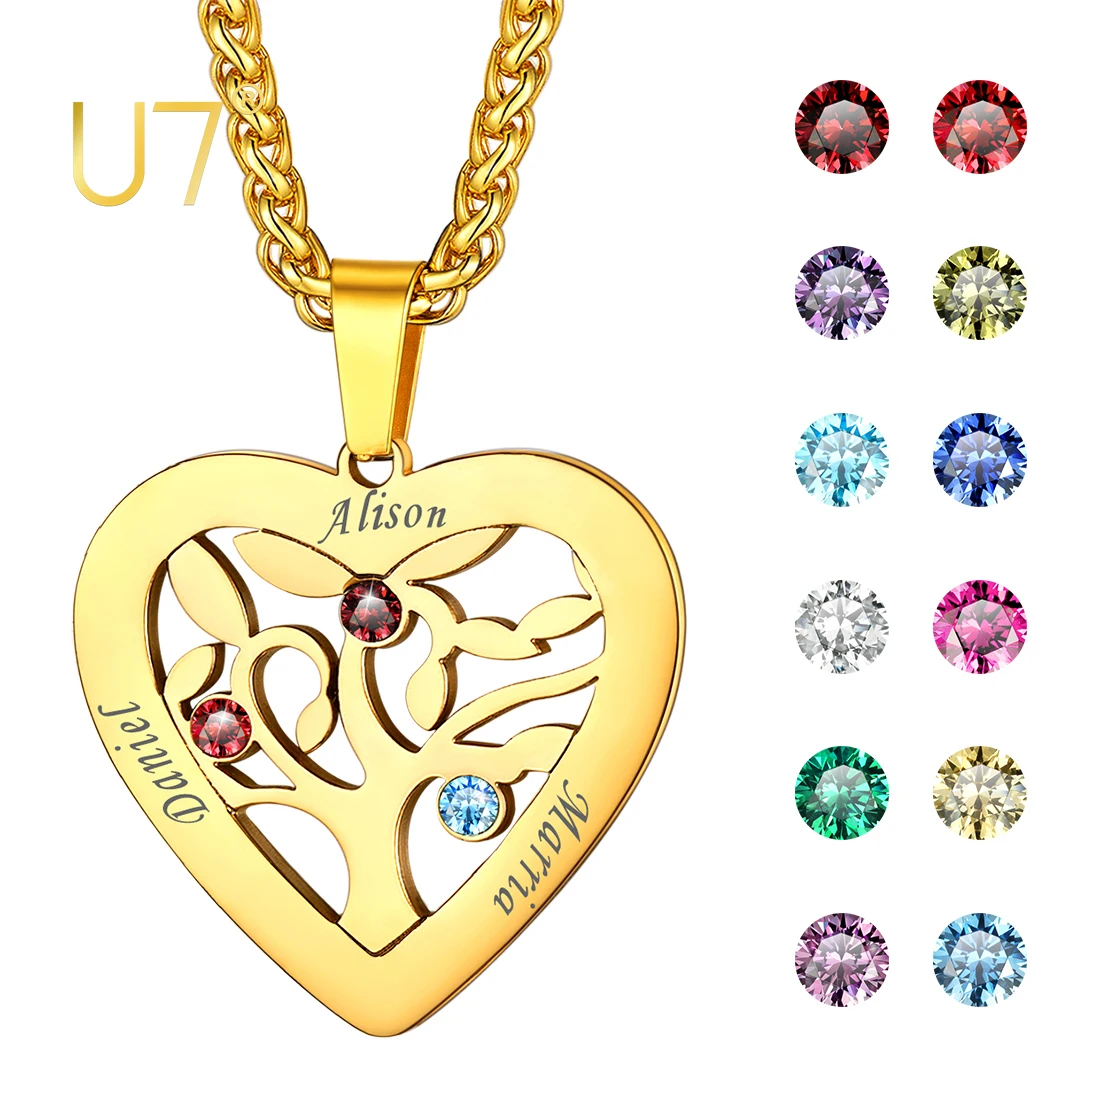 U7 Heart Pendant Necklace Personalized Engraved Stainless Steel Jewelry Friend Family Names Birthstone Gift for Women Girls